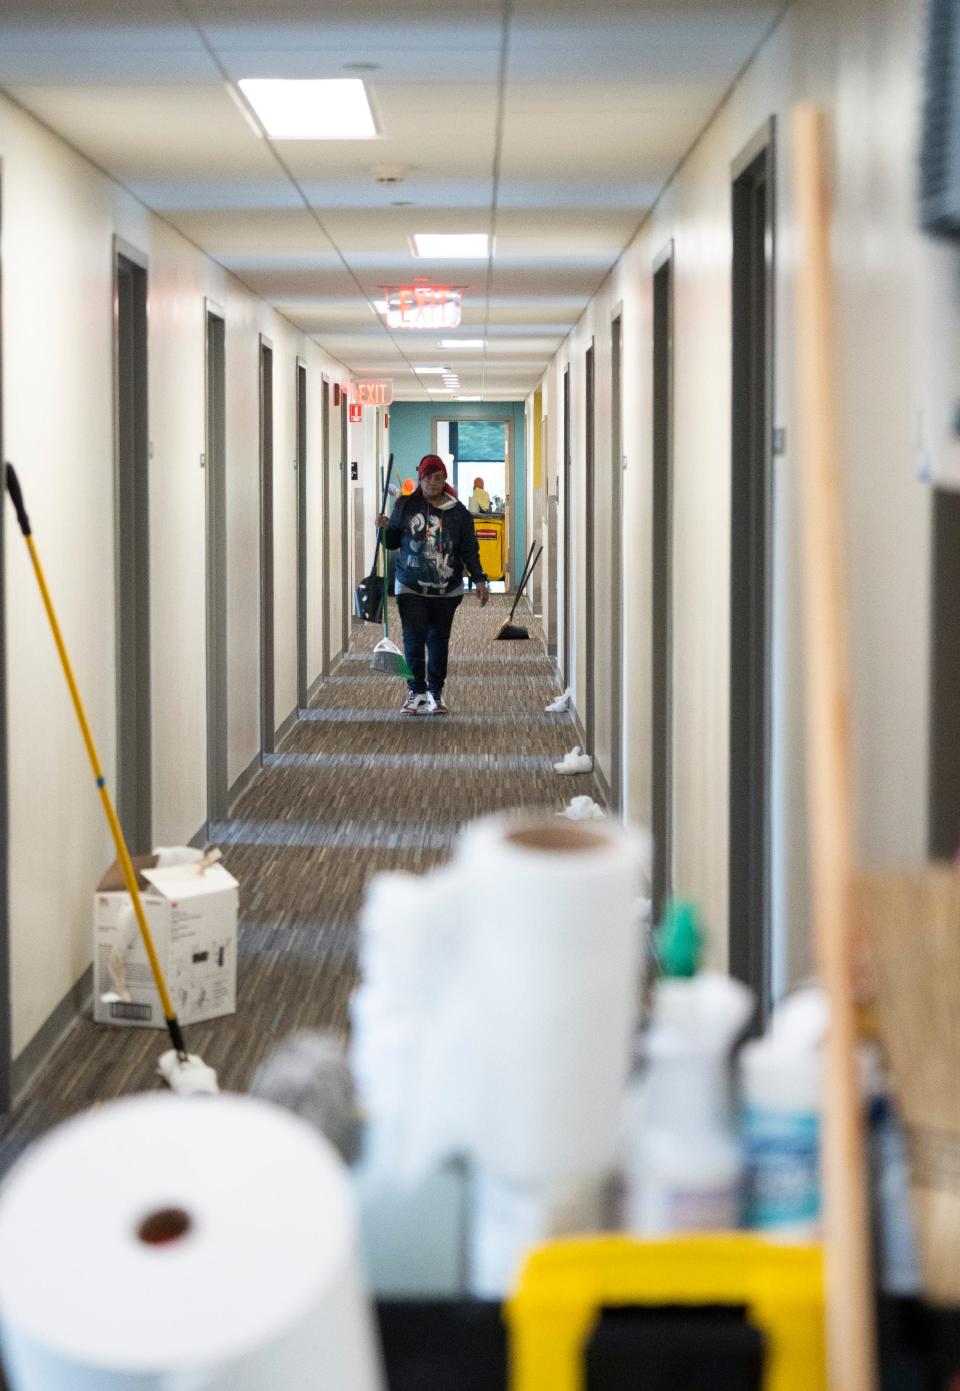 About 250 custodial workers across the Ohio State Columbus campus work from after spring commencement in May to move-in day in August to prepare the dorms for new students.